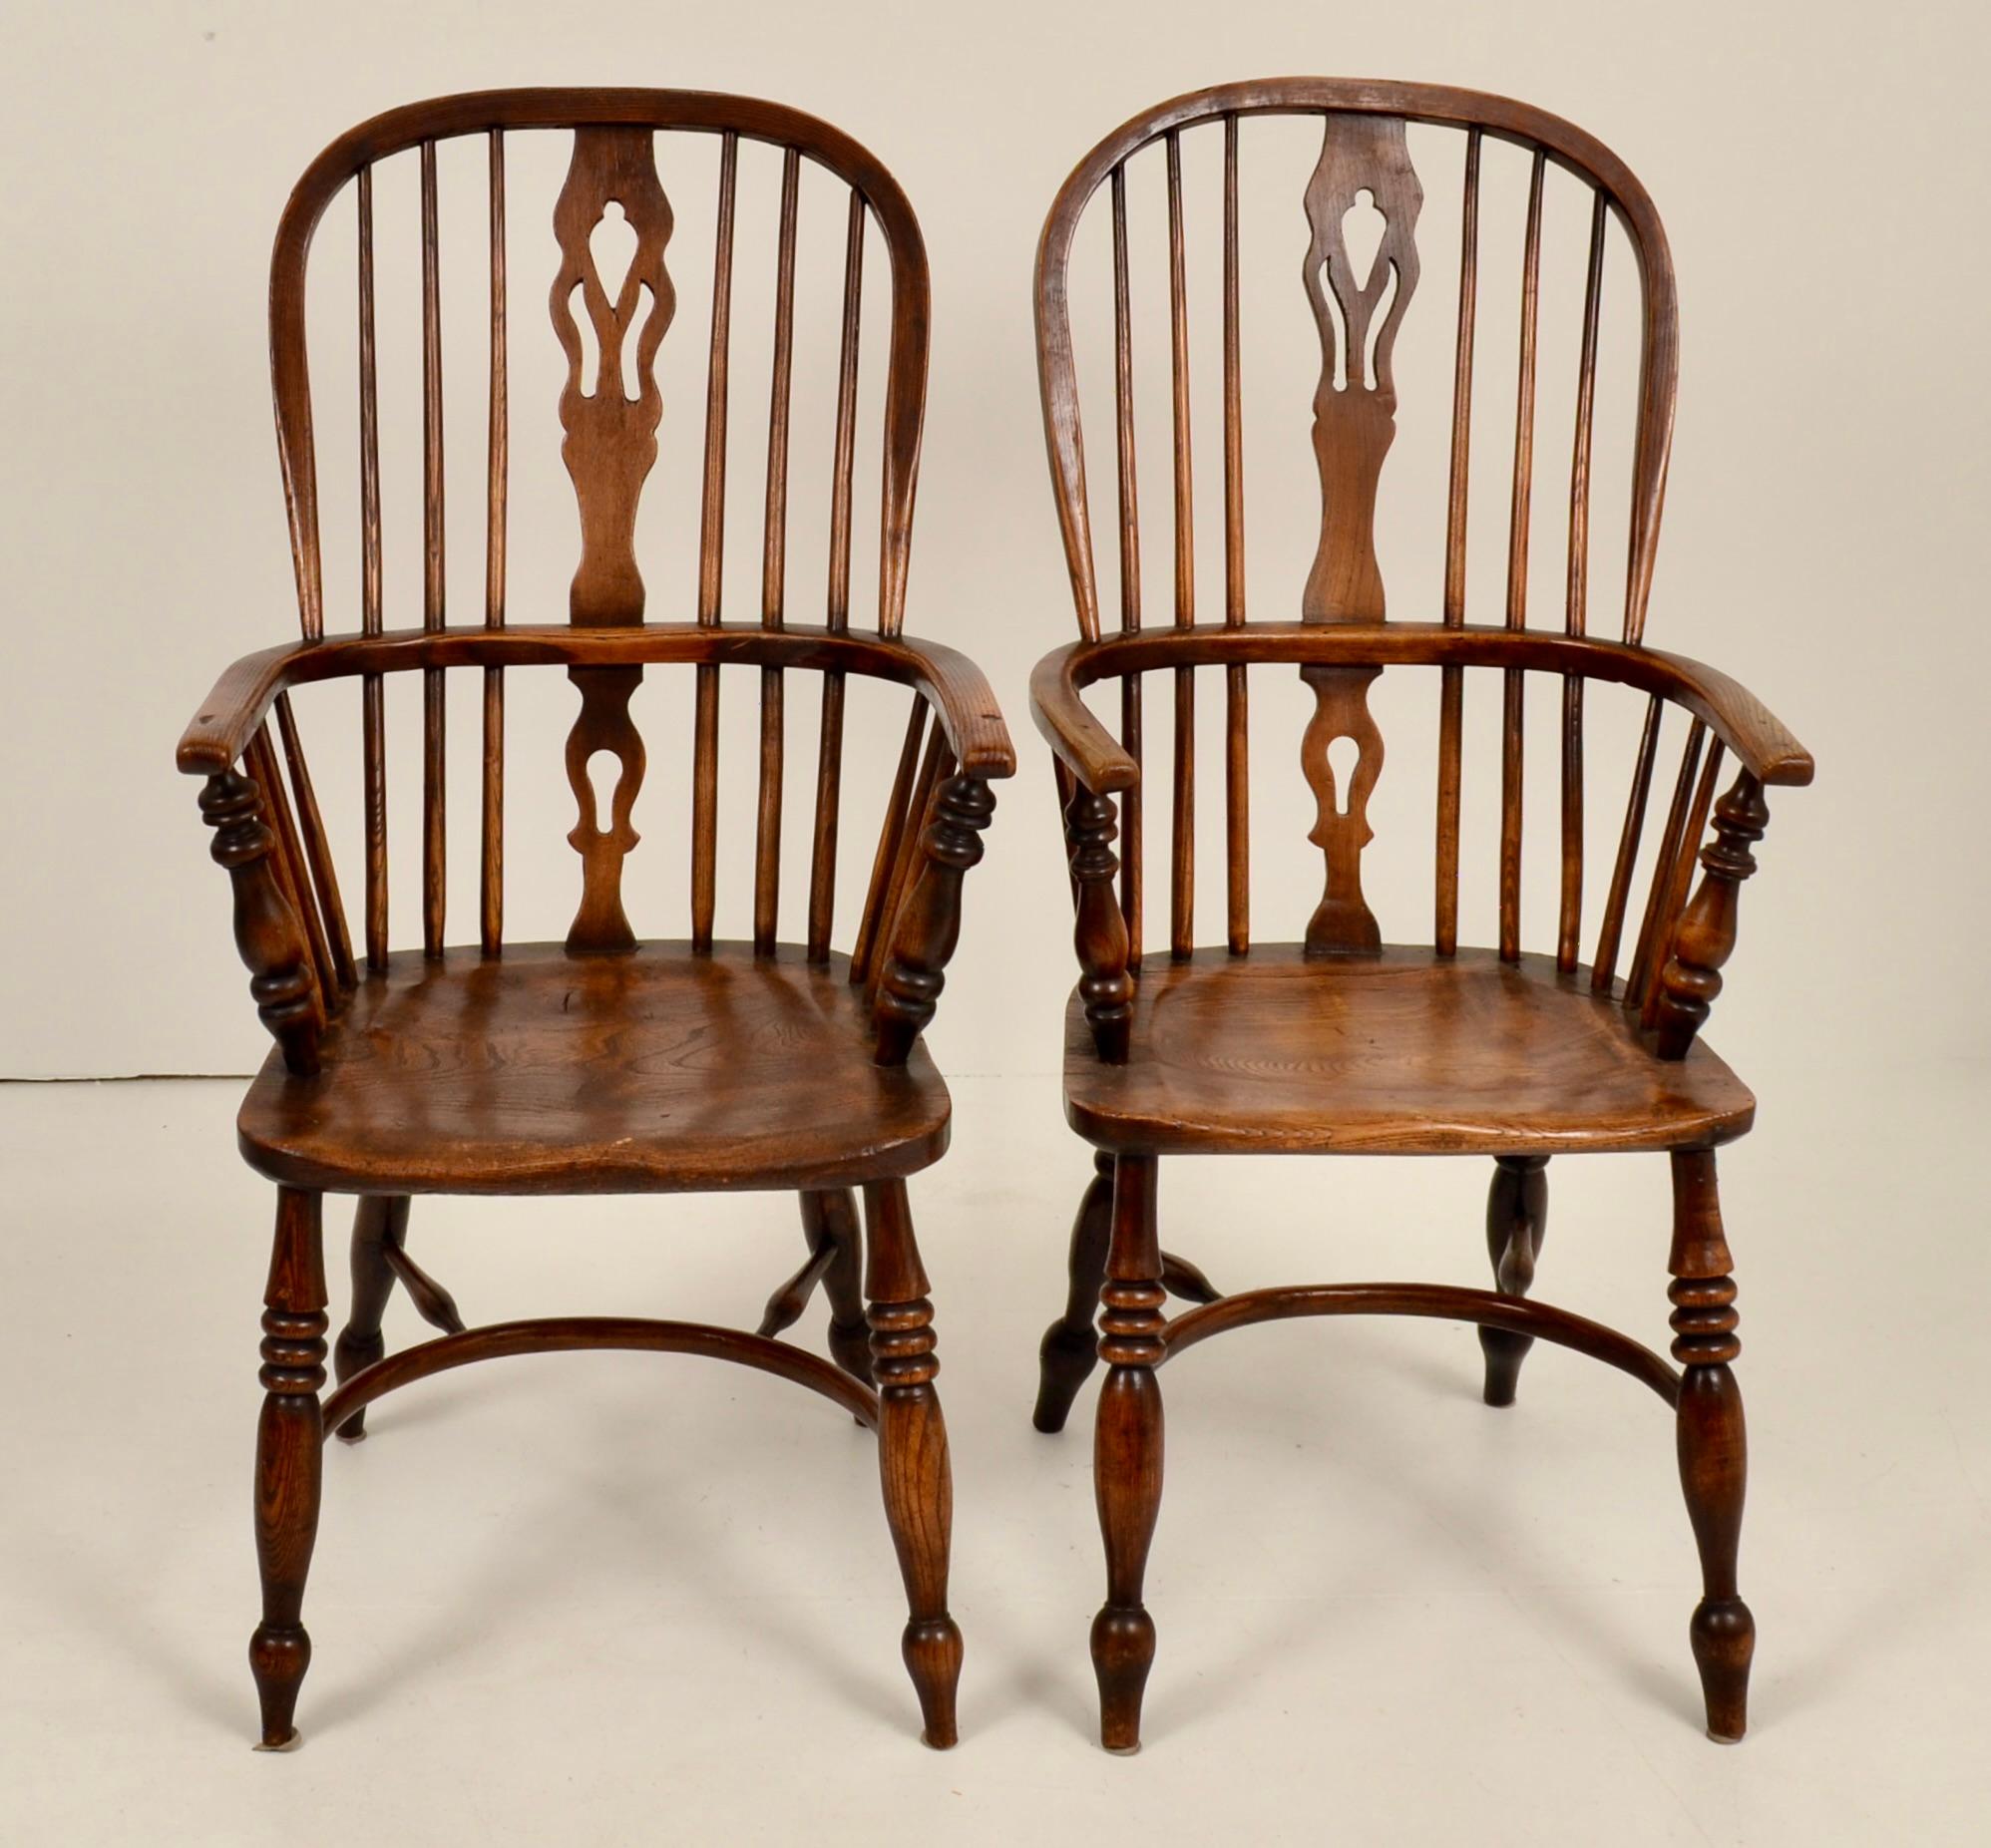 Early Victorian 19th C English Oak Windsor Chairs - Set of Six For Sale